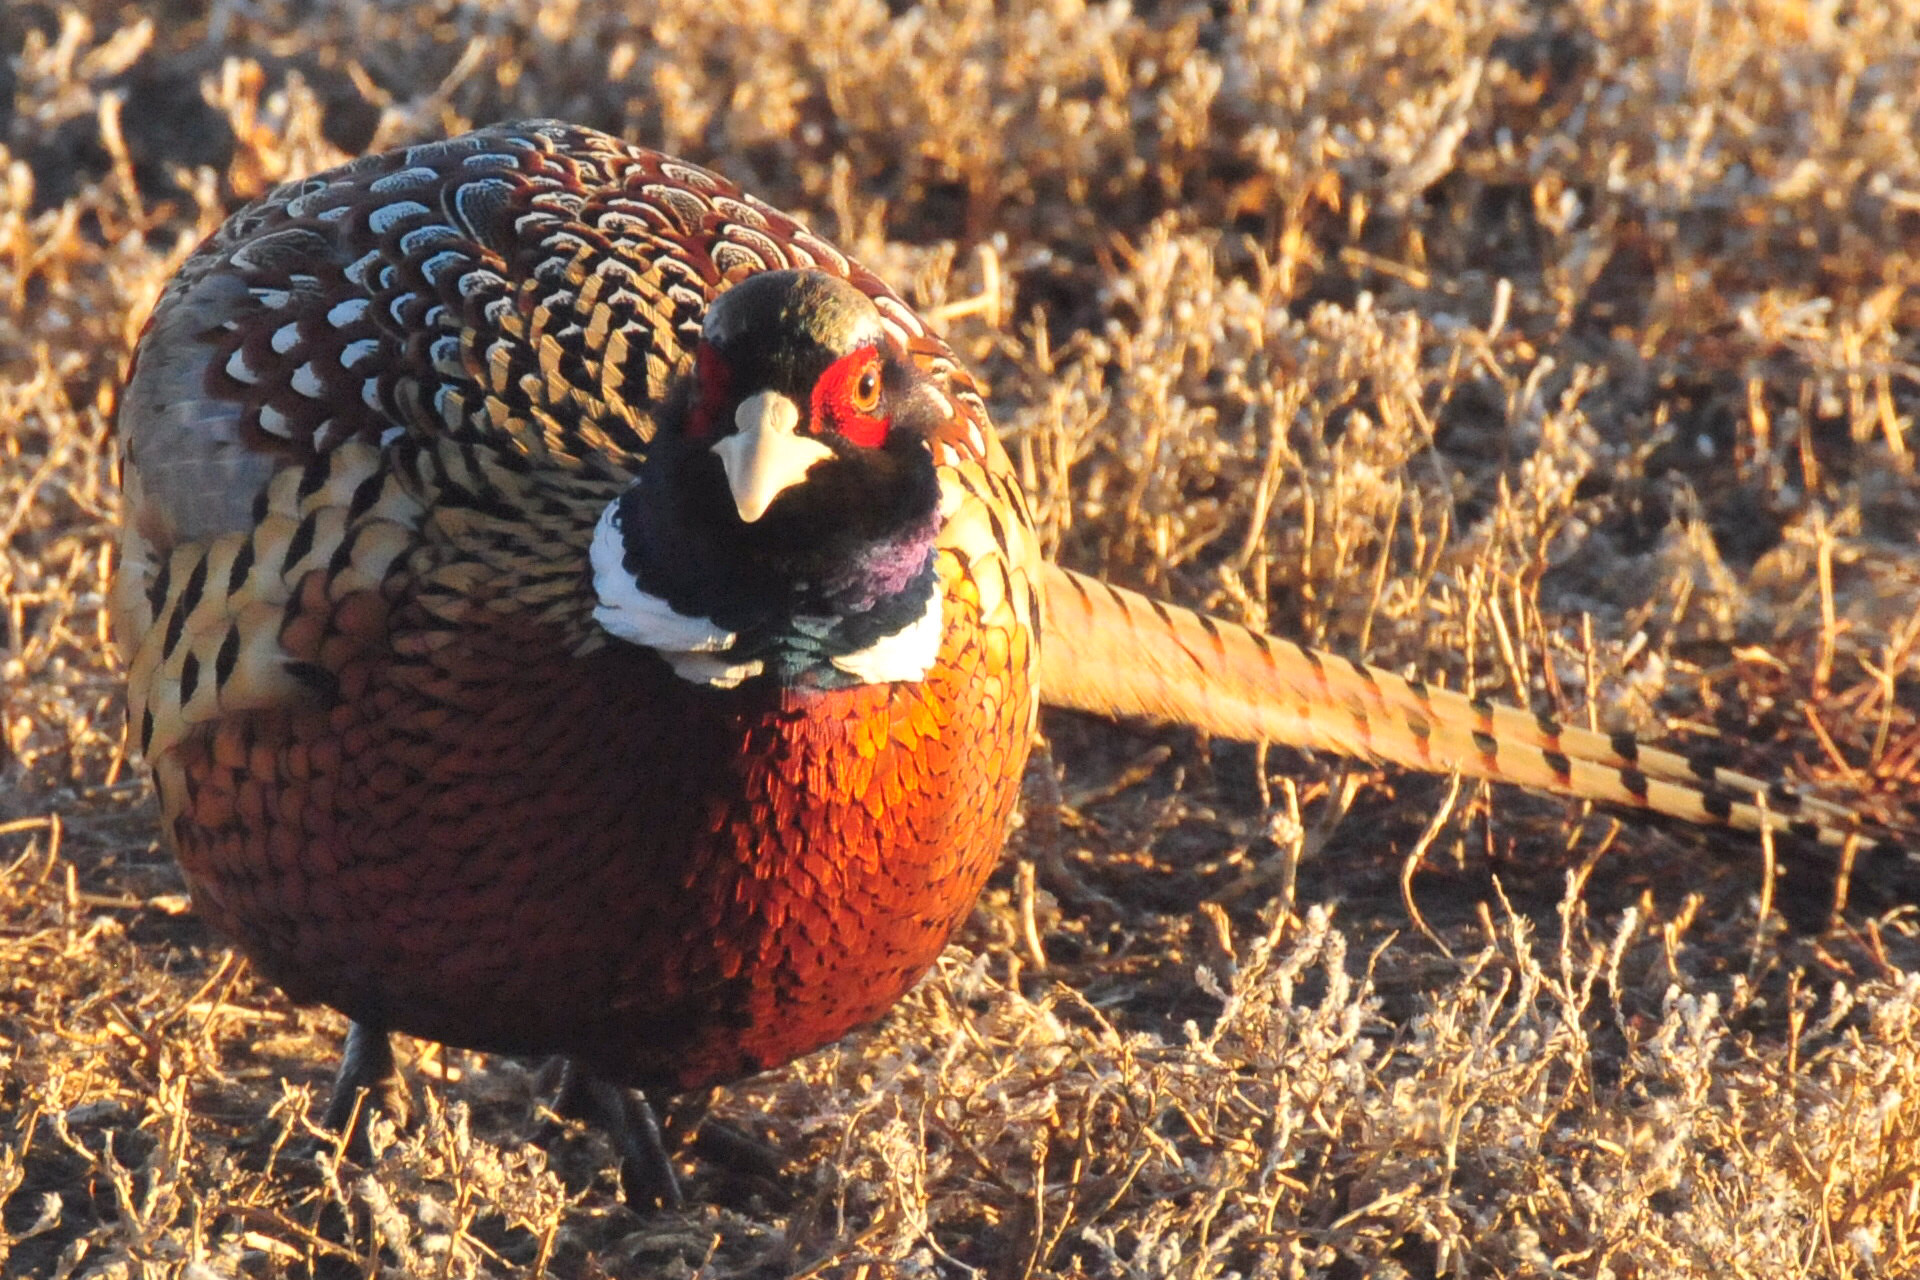 More Than 1,500 Pheasants, Quail, and Ducks Euthanized as Texas Confirms Bird Flu Outbreak at a Commercial Game Bird Operation